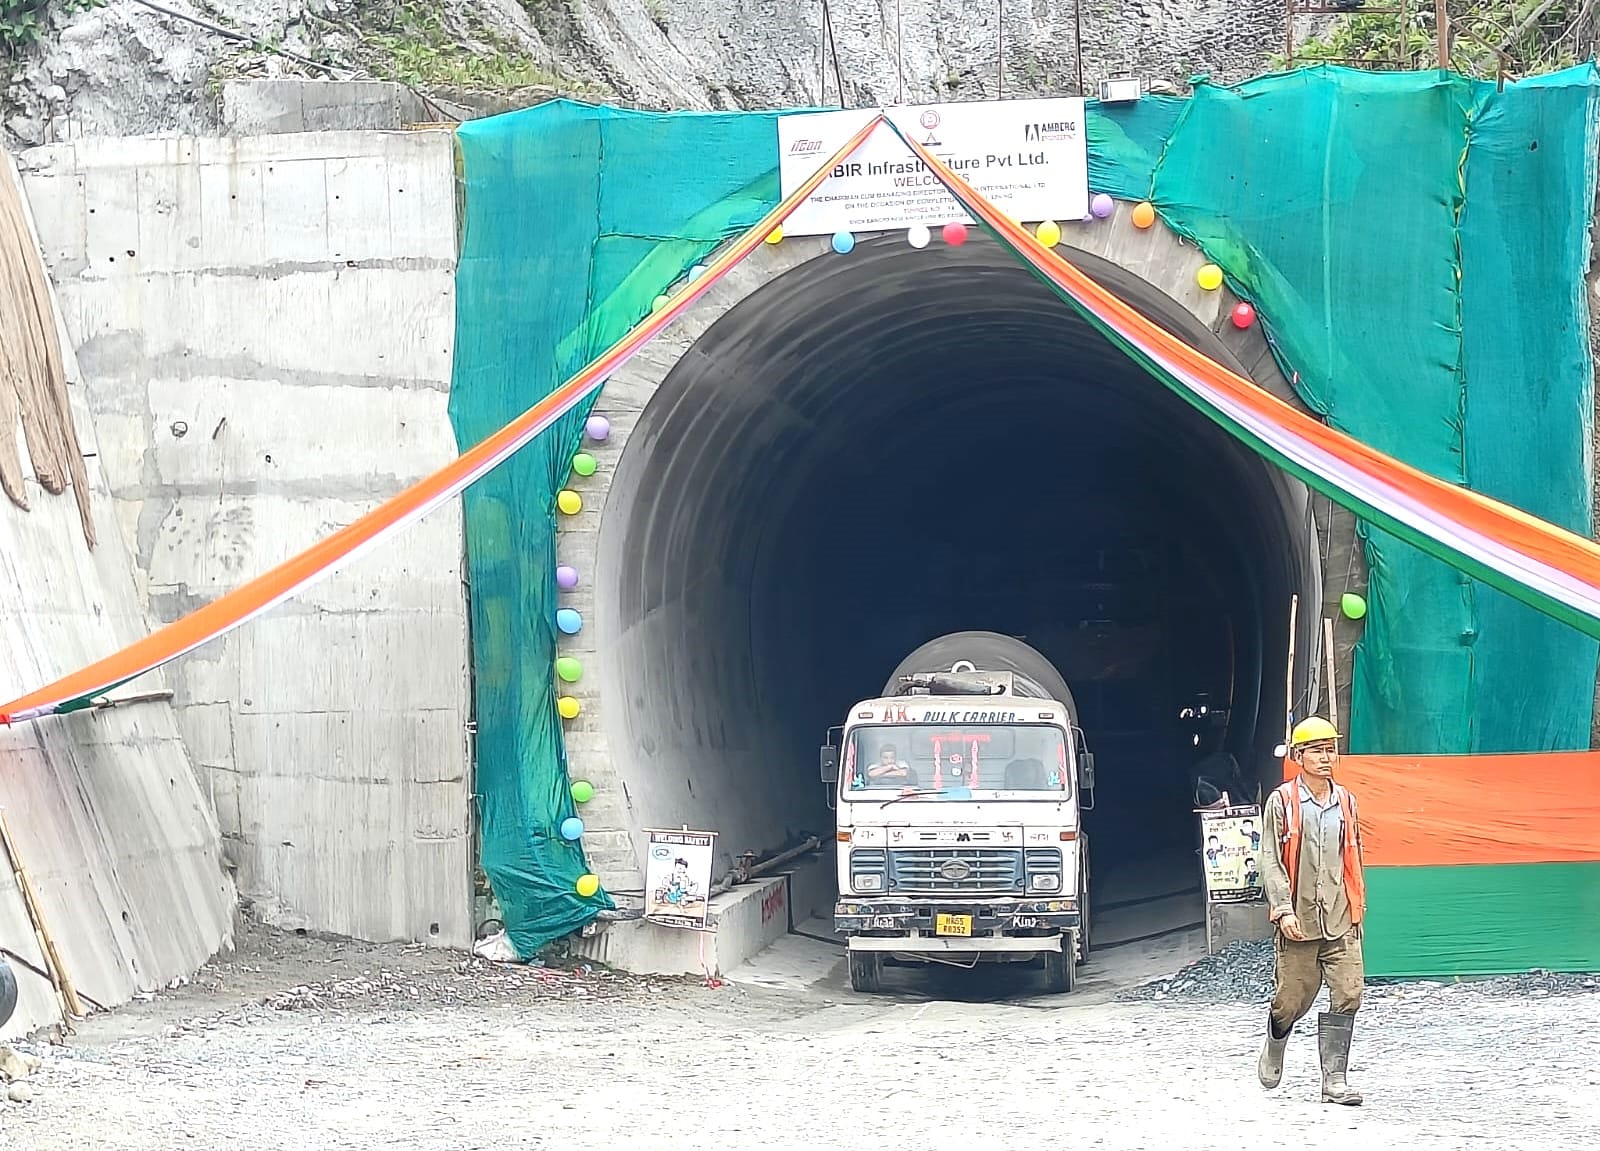 Sevoke-Sikkim Railway project cost risen from Rs 1340 Cr now to Rs 12,500 Cr